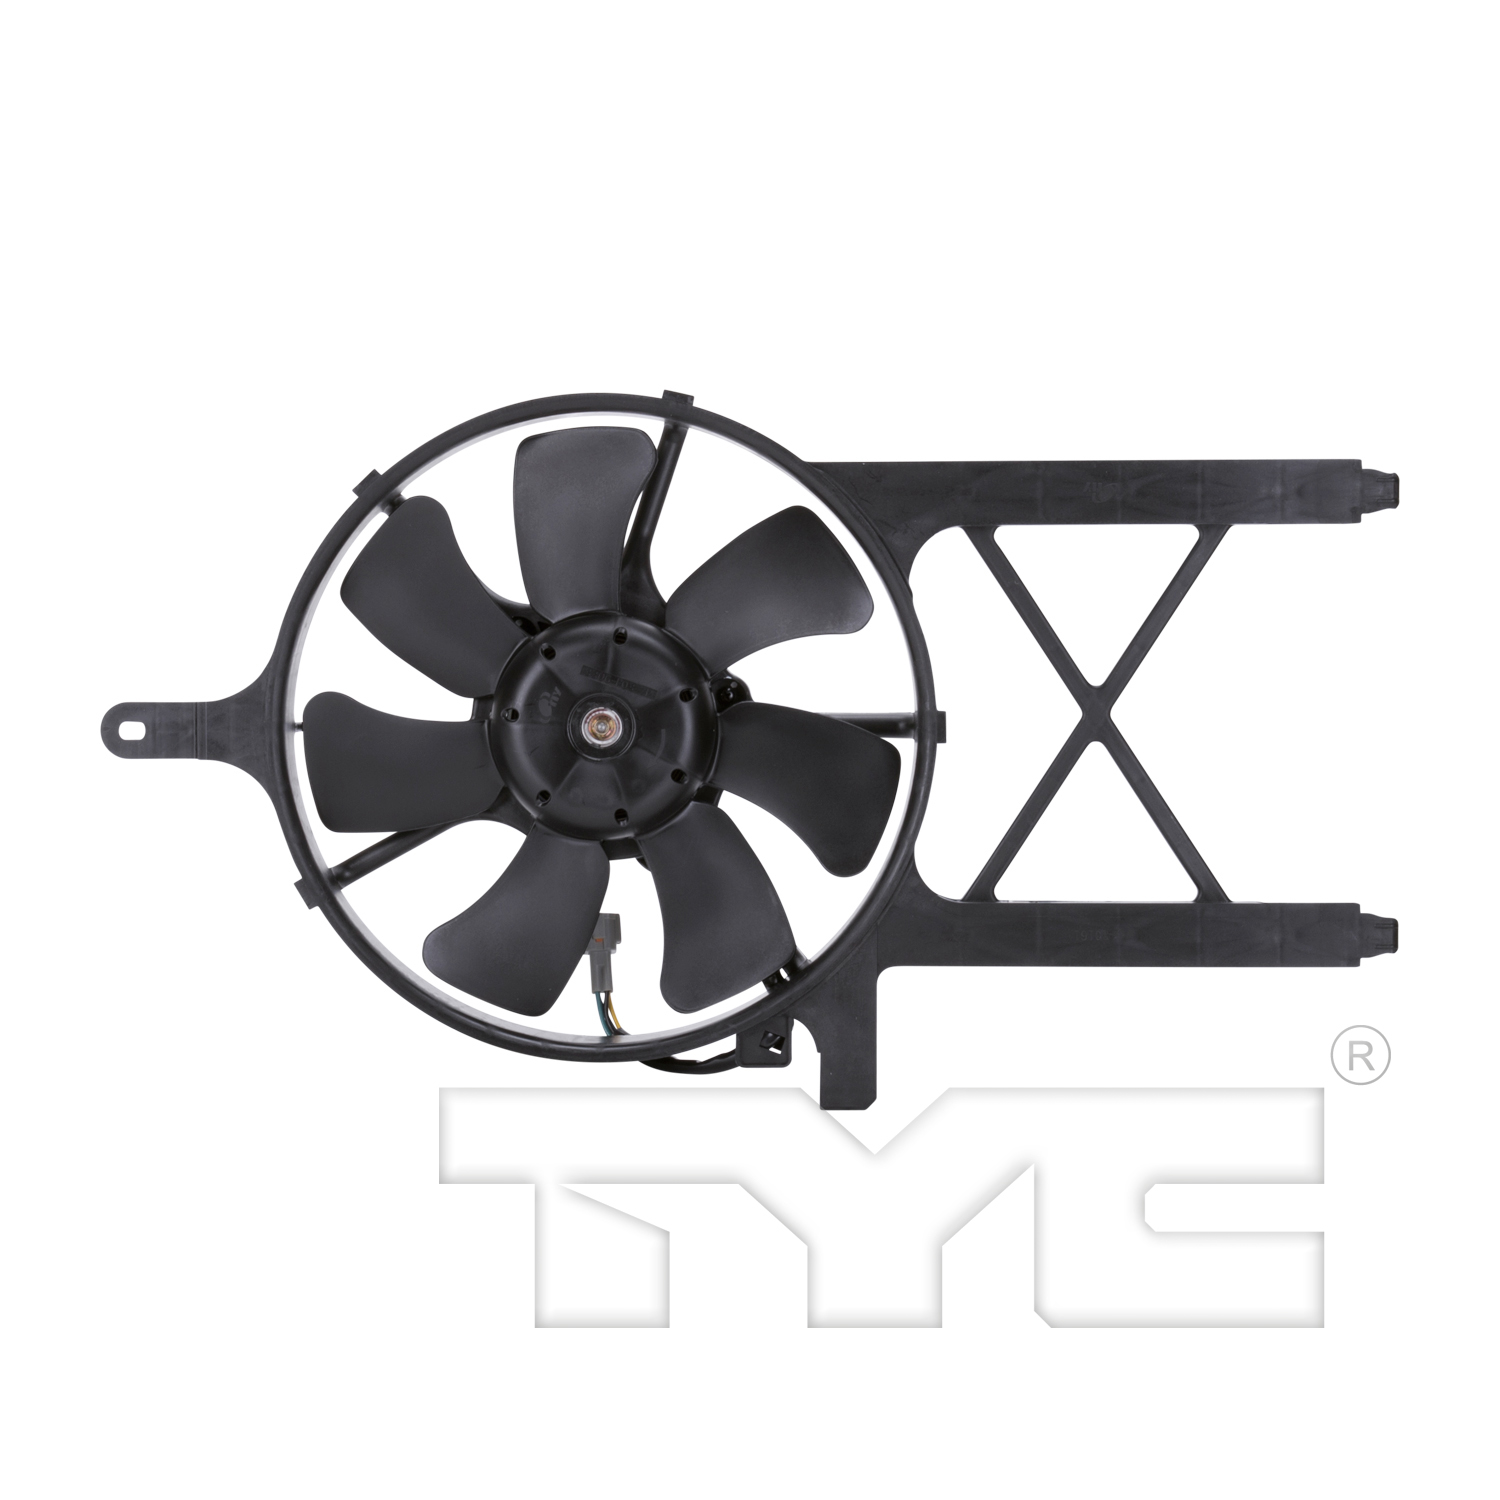 Aftermarket FAN ASSEMBLY/FAN SHROUDS for NISSAN - PATHFINDER, PATHFINDER,05-06,Air conditioning condenser/fan assy